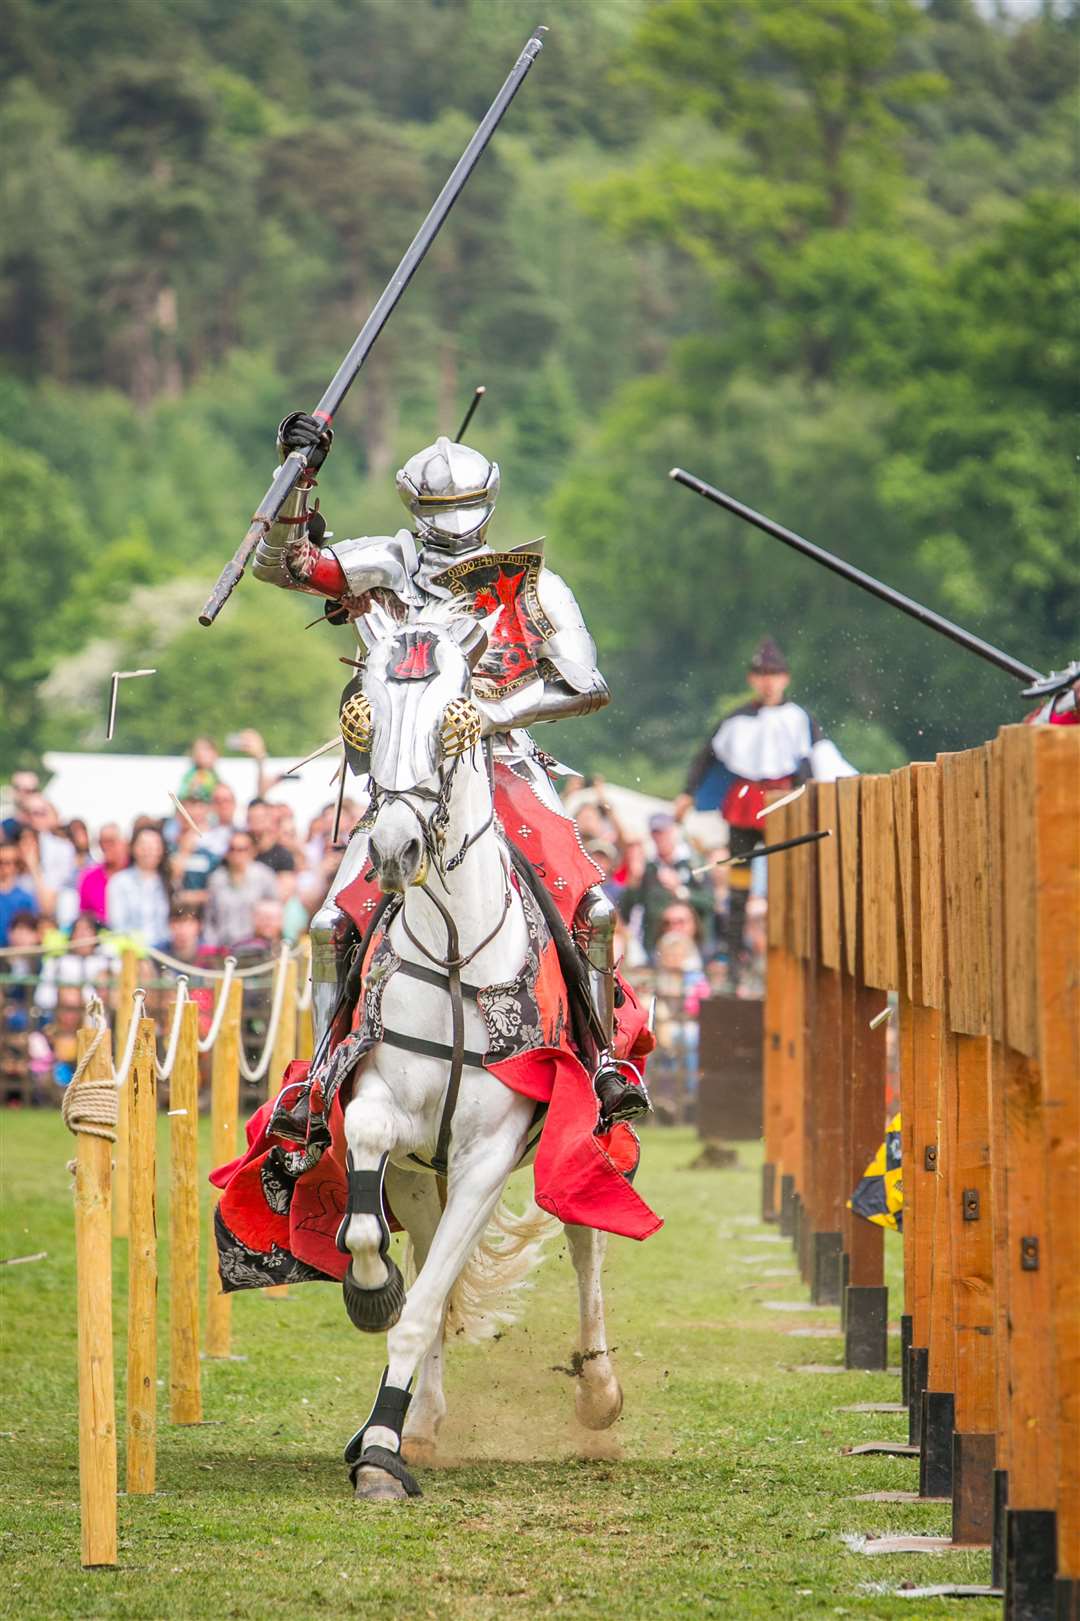 The joust between England and France at last year's event Picture: www.matthewwalkerphotography.com